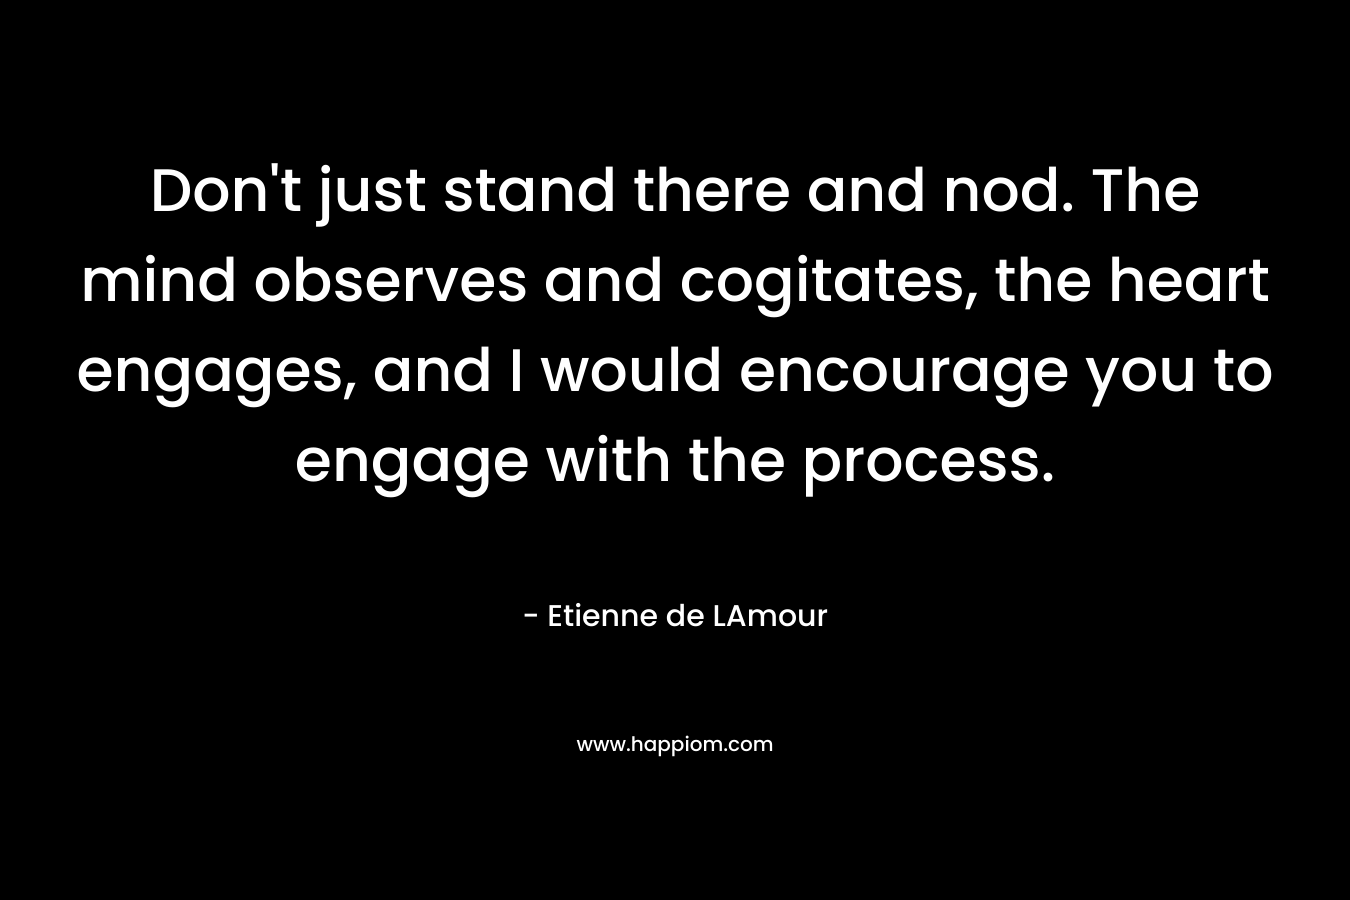 Don’t just stand there and nod. The mind observes and cogitates, the heart engages, and I would encourage you to engage with the process. – Etienne de LAmour